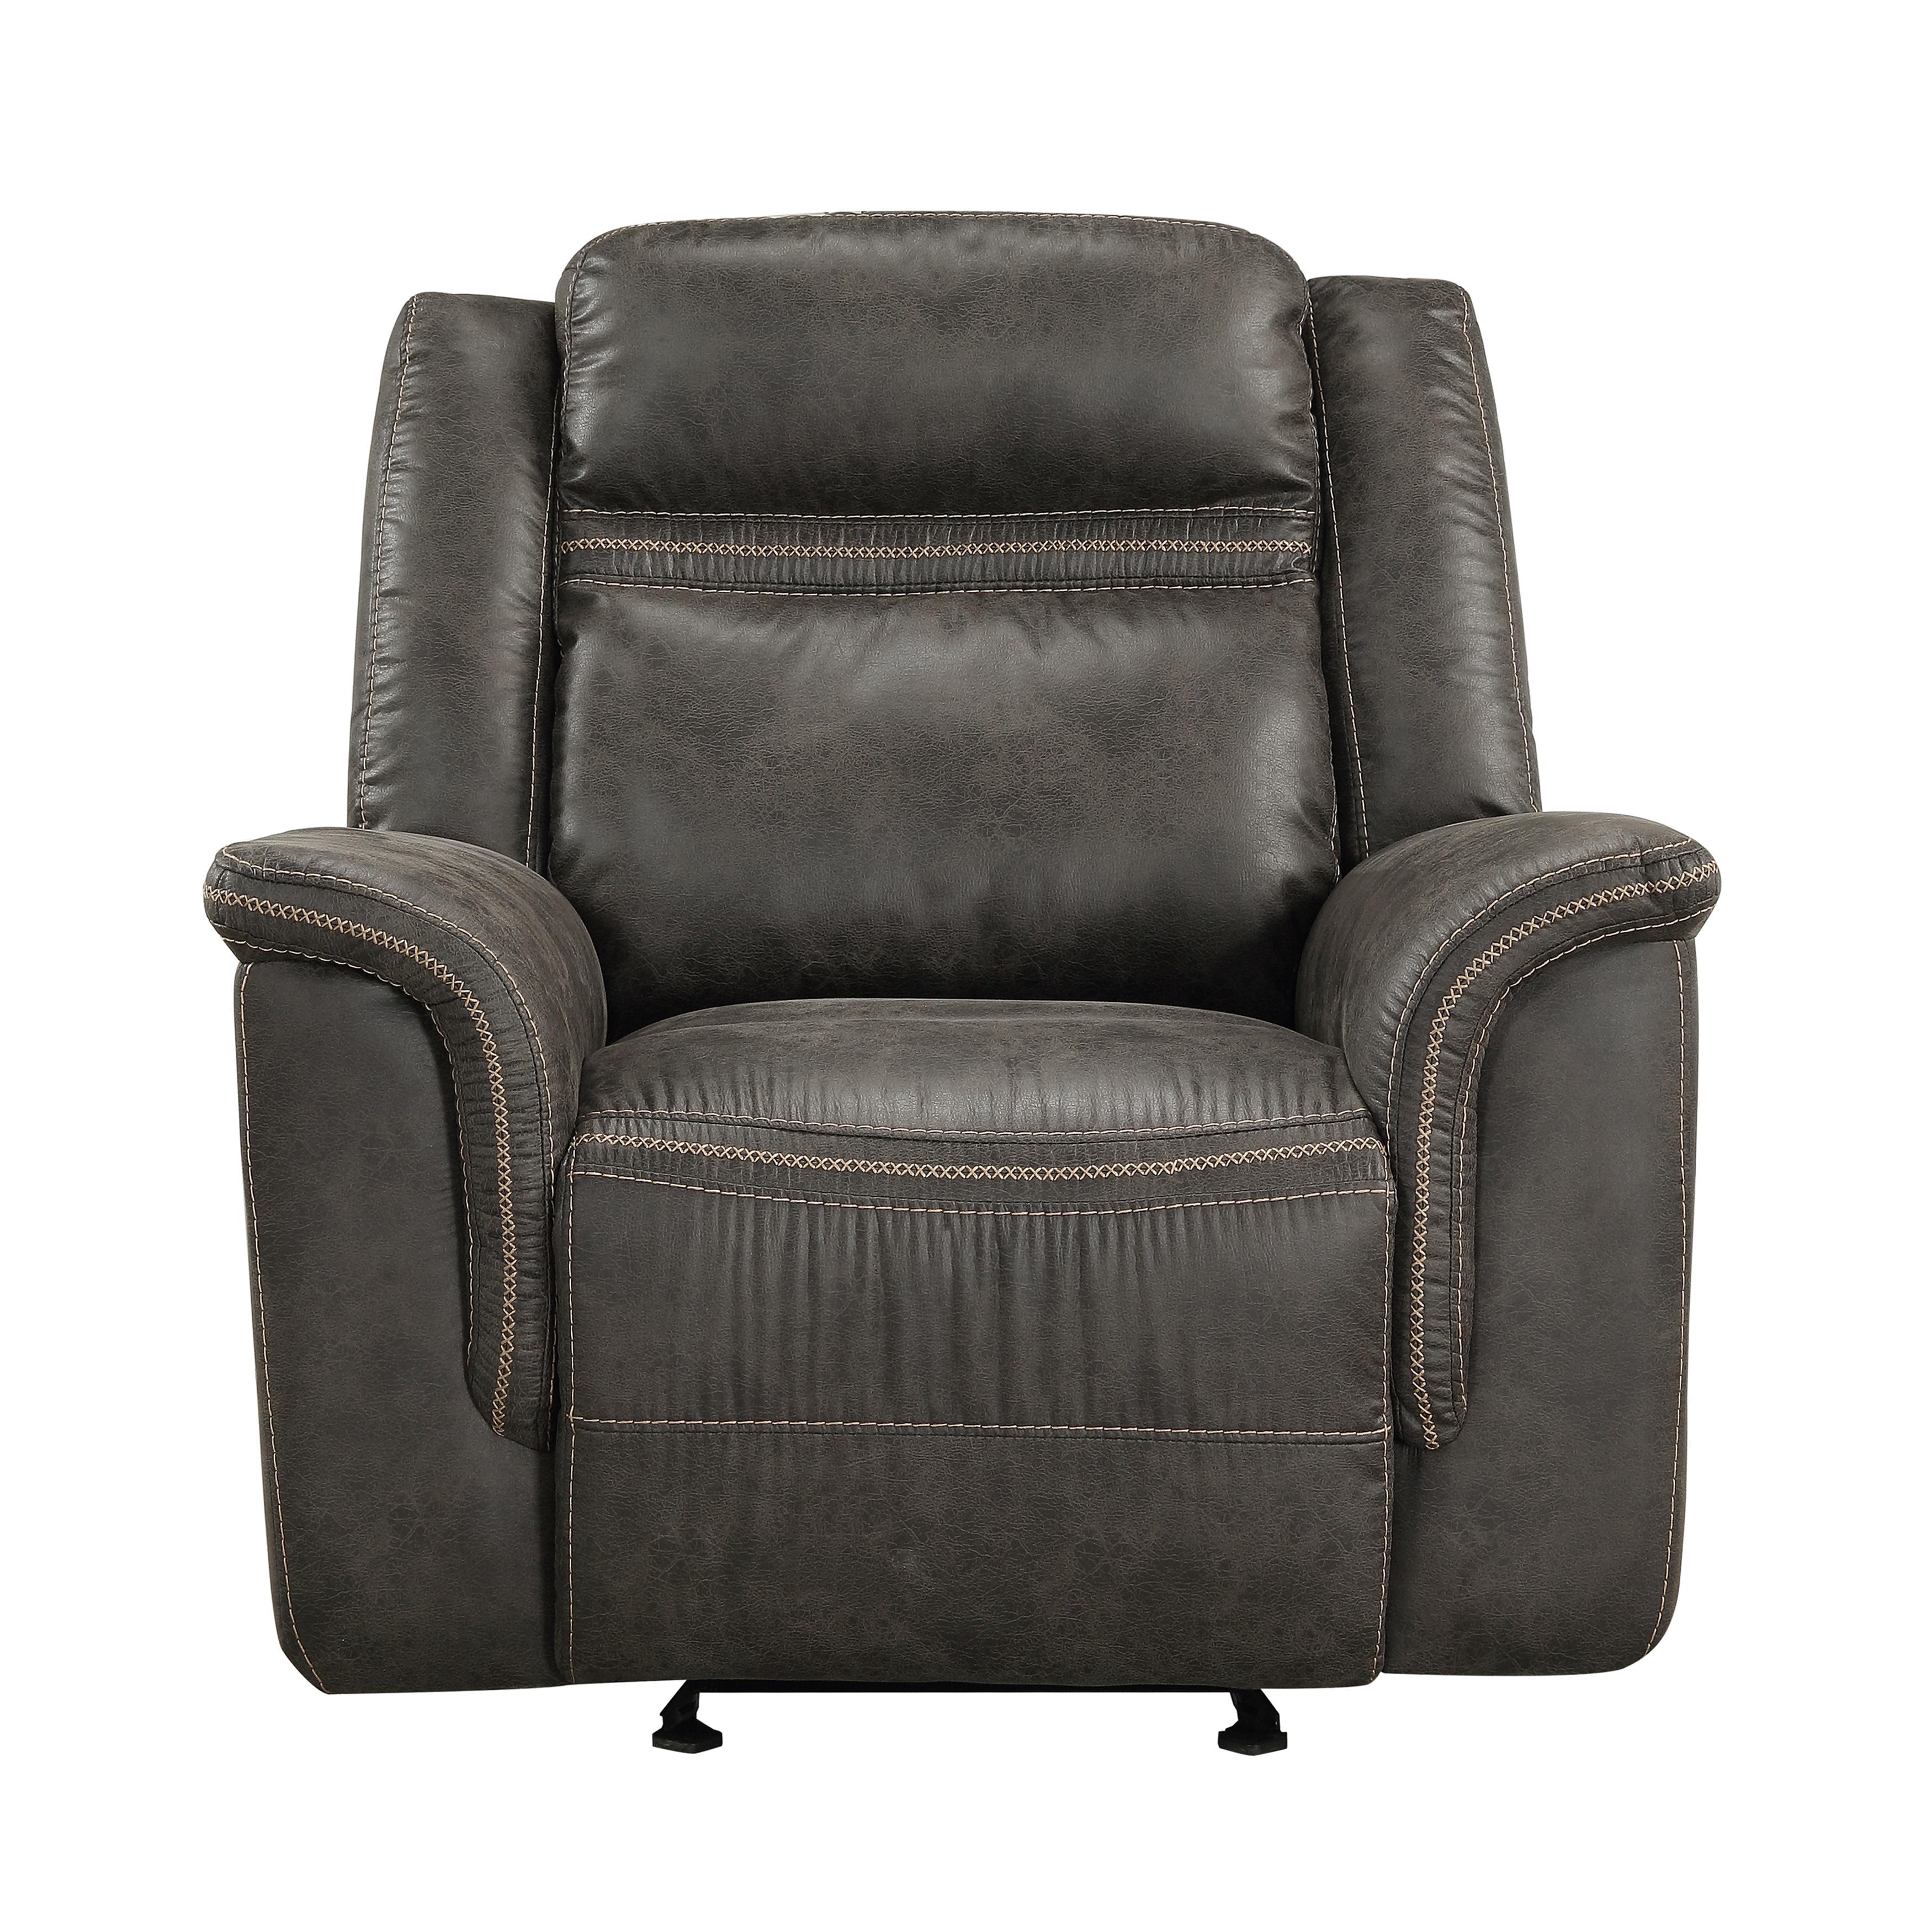 Transitional Reclining Chair 9426-1 Boise 9426-1 in Brown Microfiber